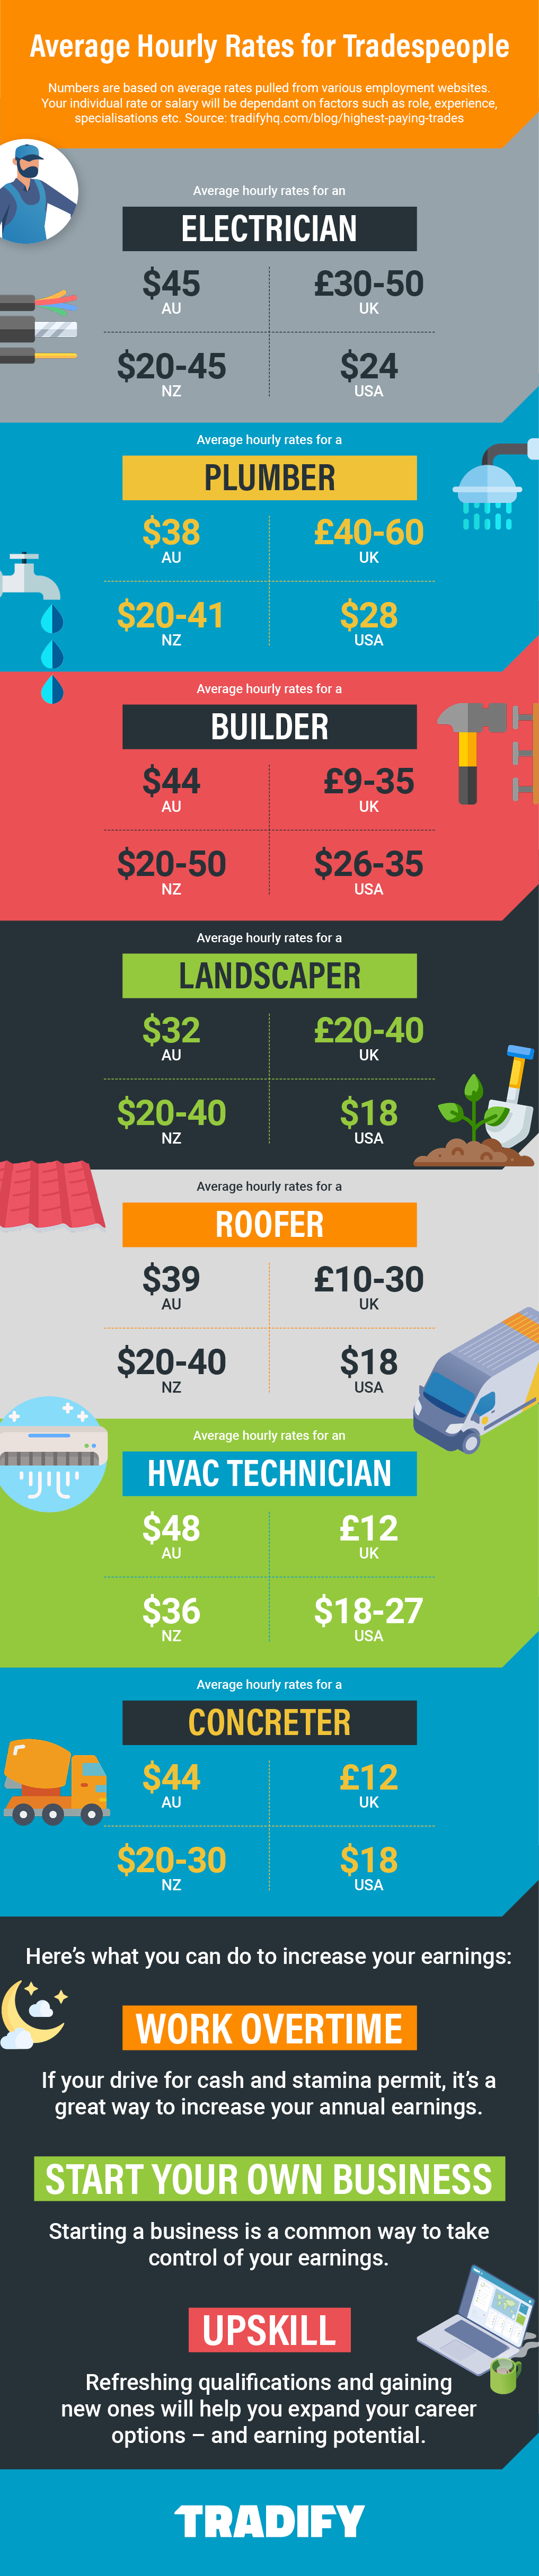 Tradify infographic - hourly rates